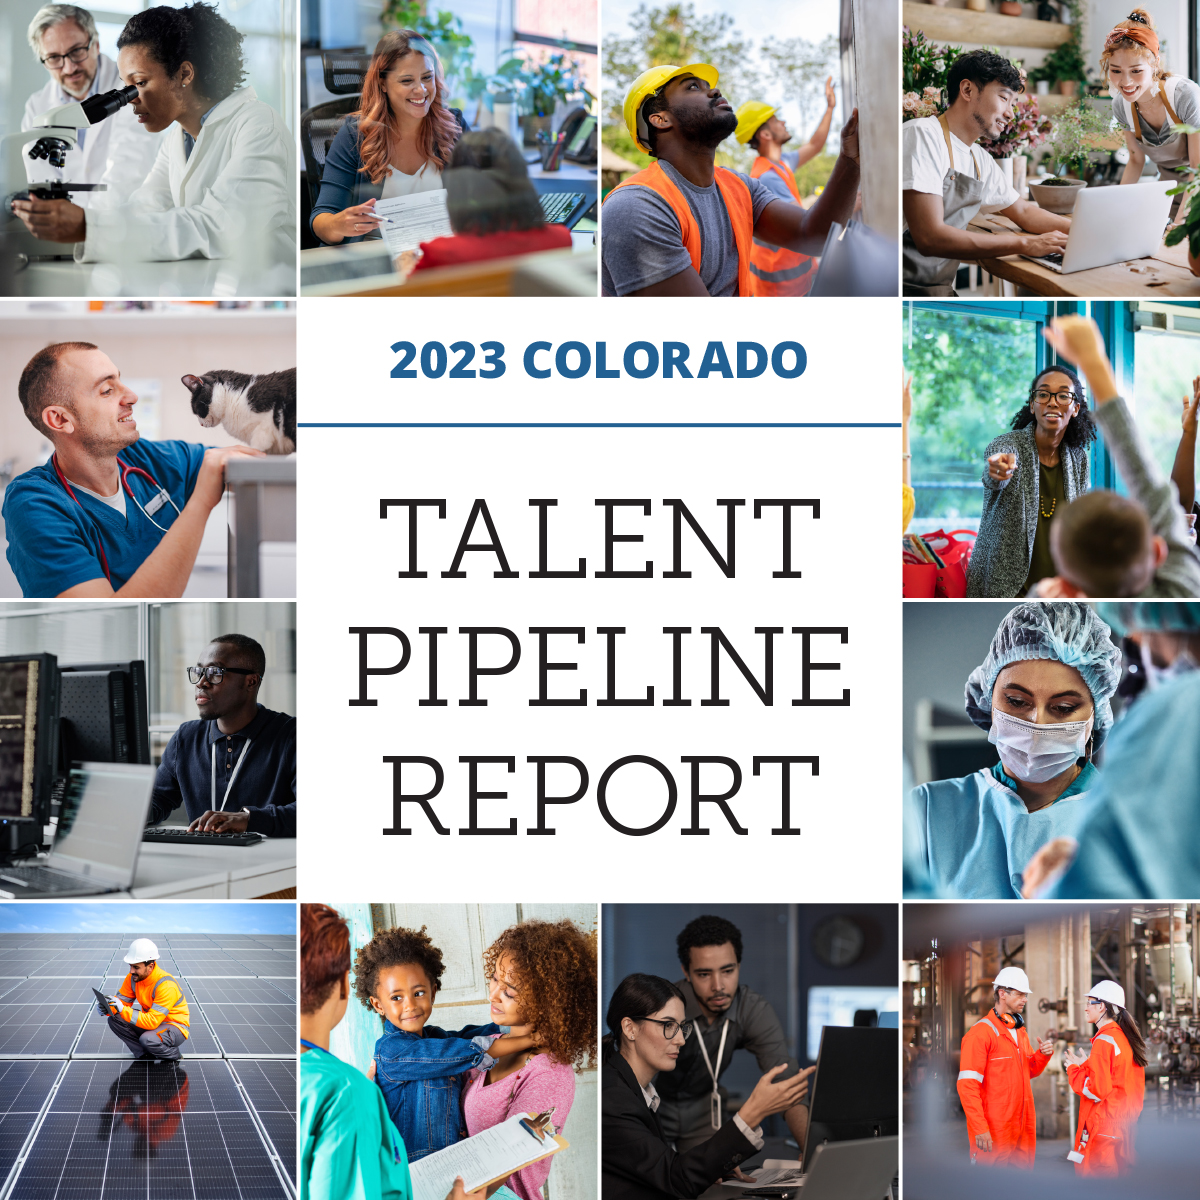 Partners of the TalentFOUND Network including @the_cwdc & @cohighered released the 2023 Talent Pipeline Report this month. Dig in to learn about the state’s labor market & strategies to align supply with industry demand to support a thriving economy: cwdc.colorado.gov/colorado-talen…